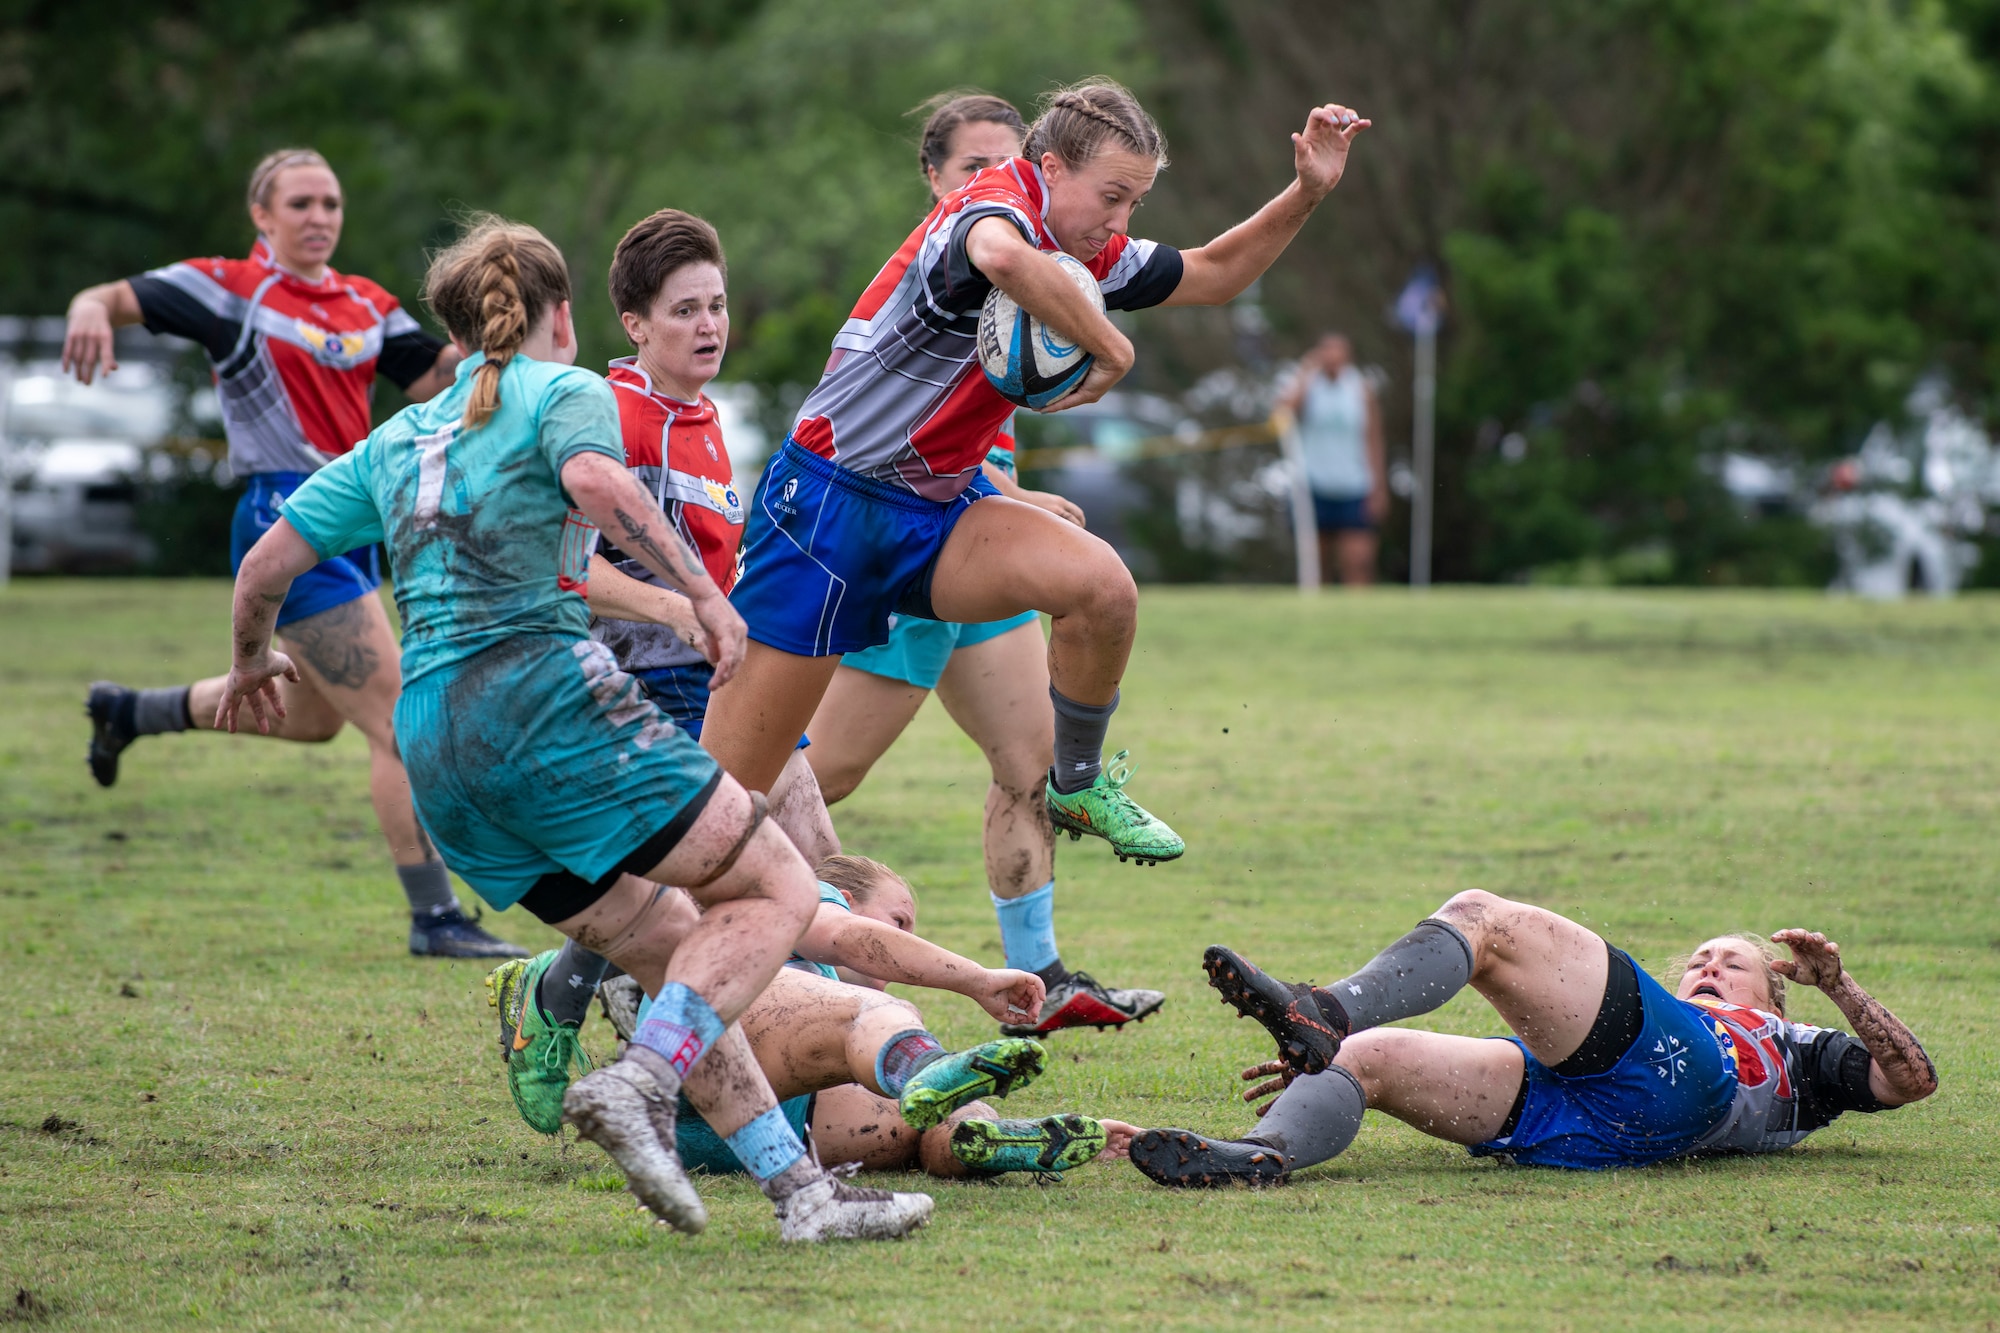 Second Lt. Adrienne Yoder, a United States Air Force rugby player, runs with the ball at the Annual Armed Forces Women’s Rugby Championship in Wilmington, North Carolina, June 26, 2021.